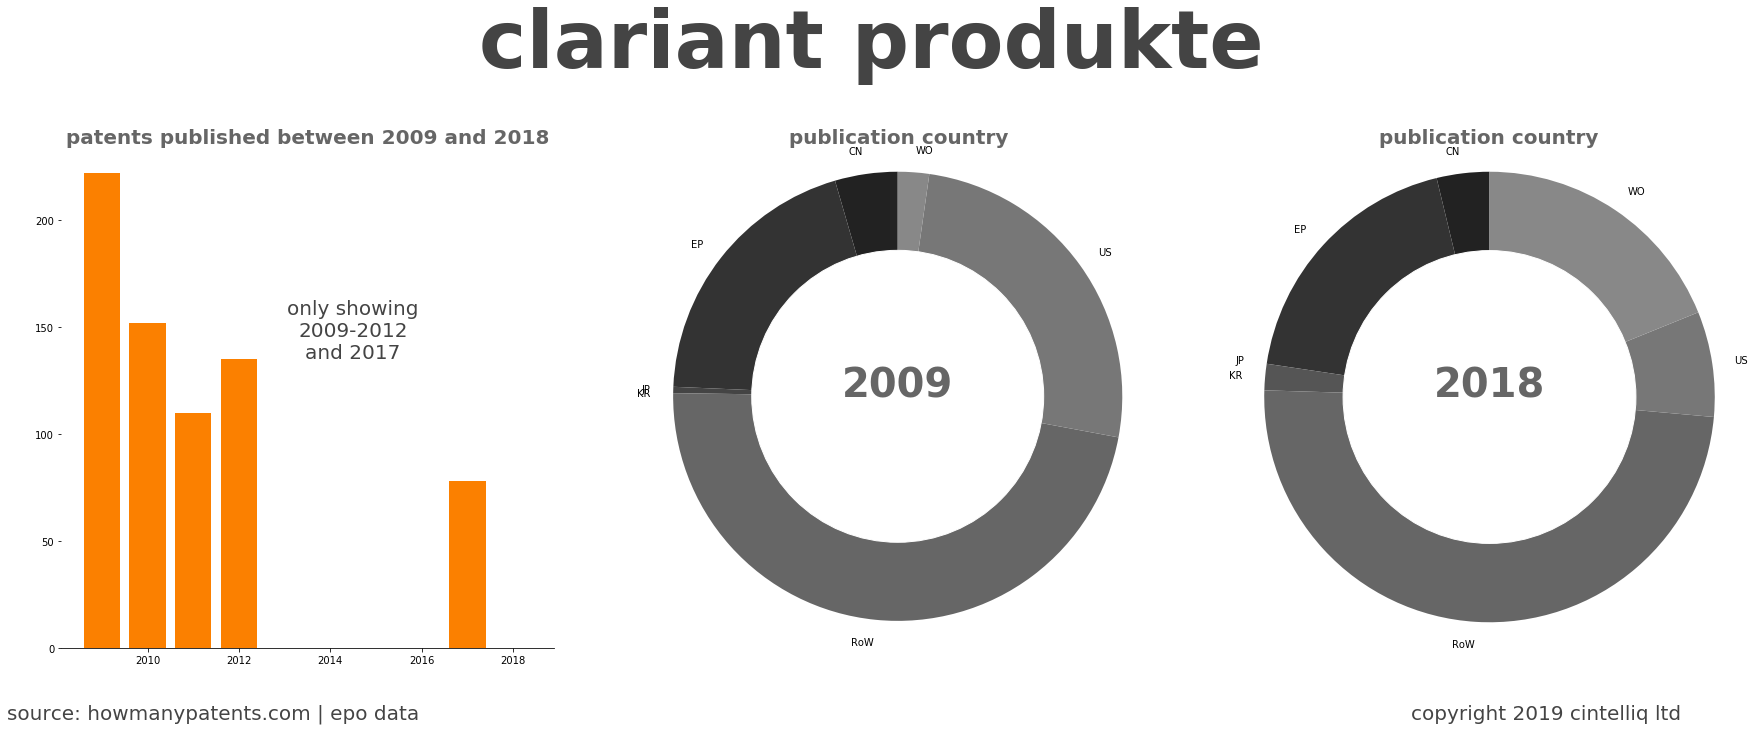 summary of patents for Clariant Produkte